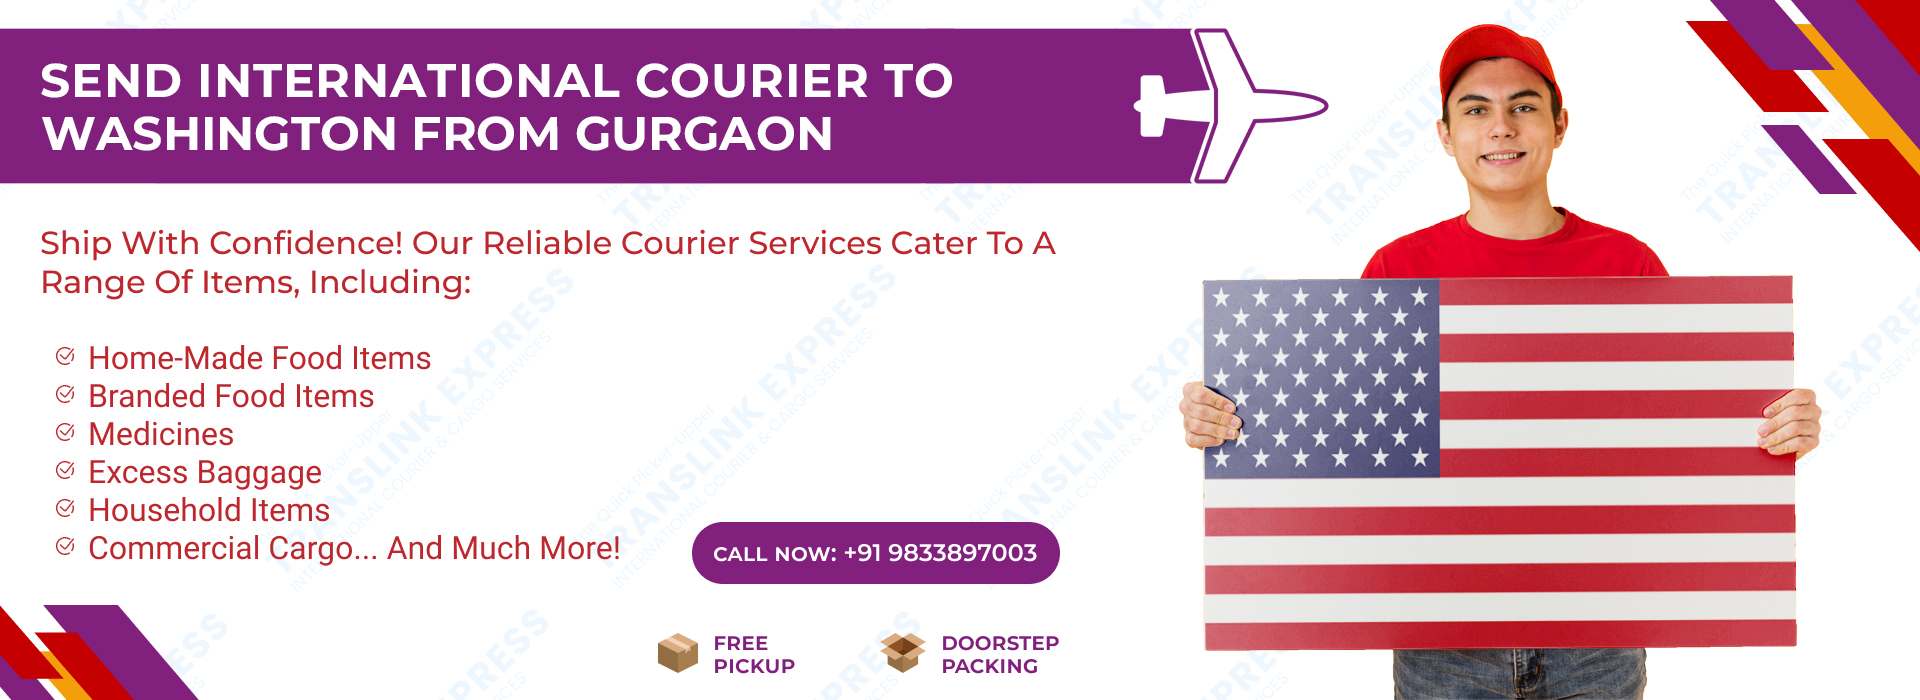 Courier to Washington From Gurgaon